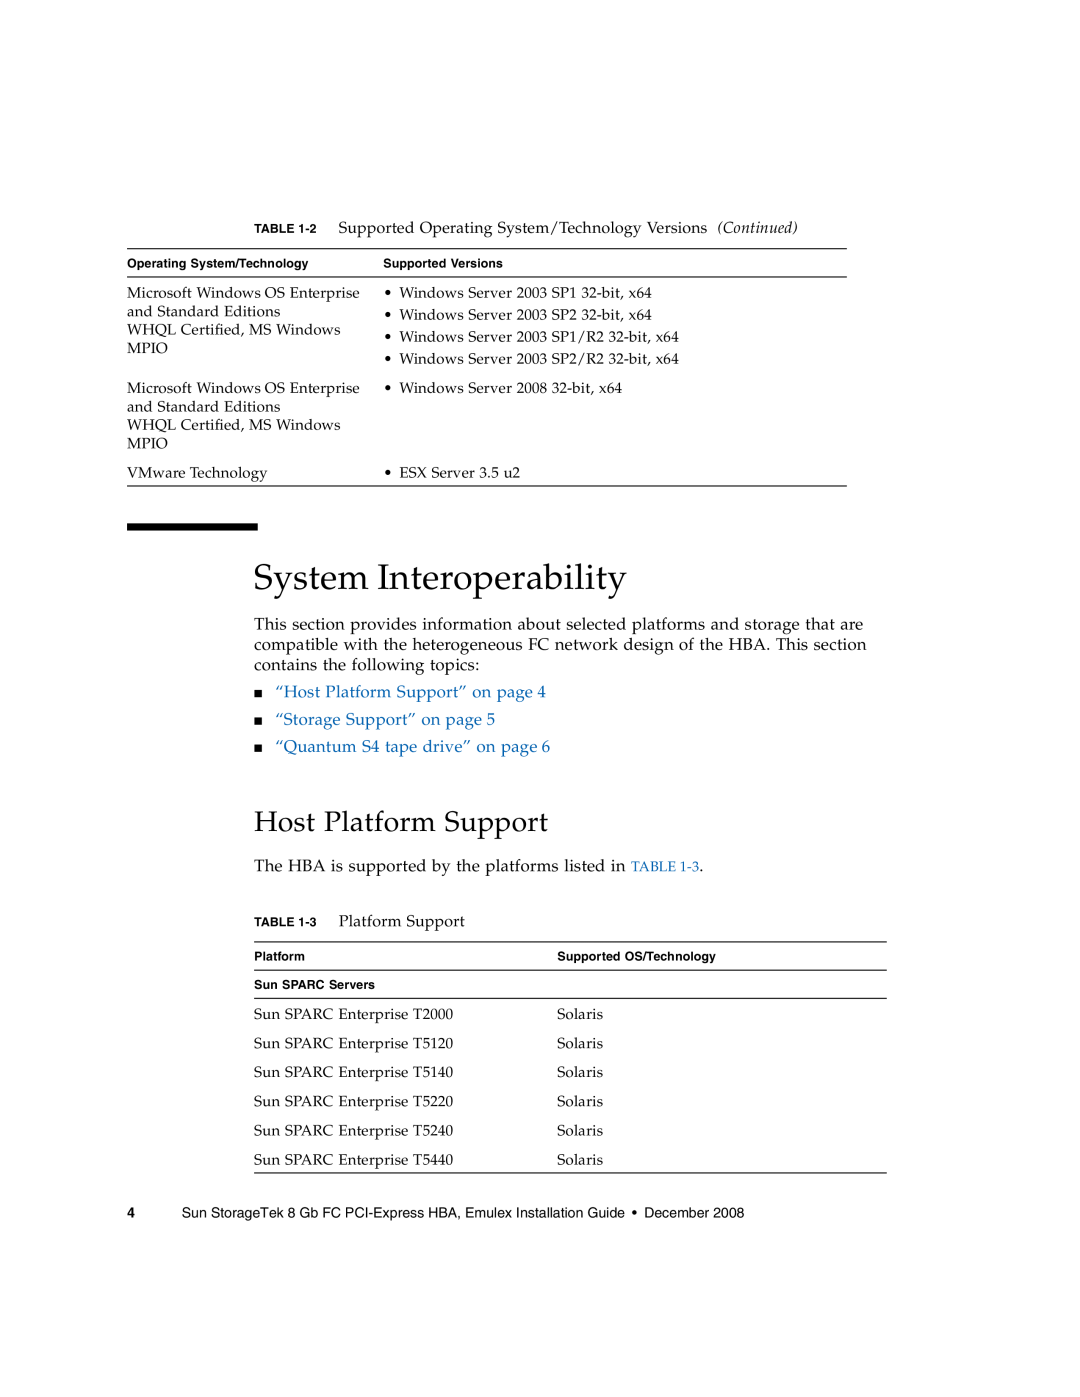 Sun Microsystems SG-XPCIE2FC-EM8-Z manual System Interoperability, Host Platform Support, “Quantum S4 tape drive” on page 